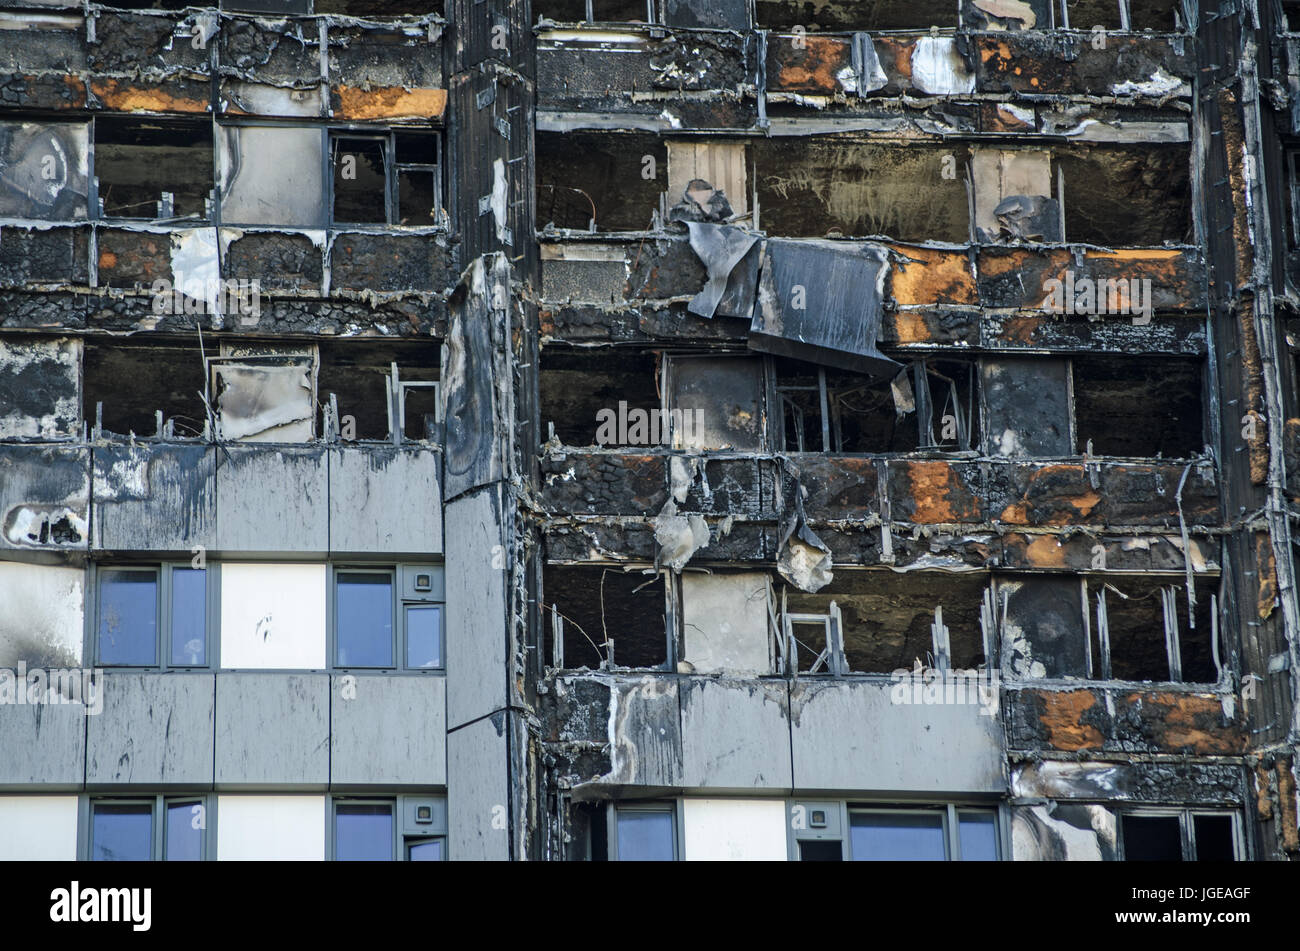 Close up view of the exterior of the Grenfell Tower block of flats in which at least 80 people lost their lives in a fire.  Remains of exterior claddi Stock Photo